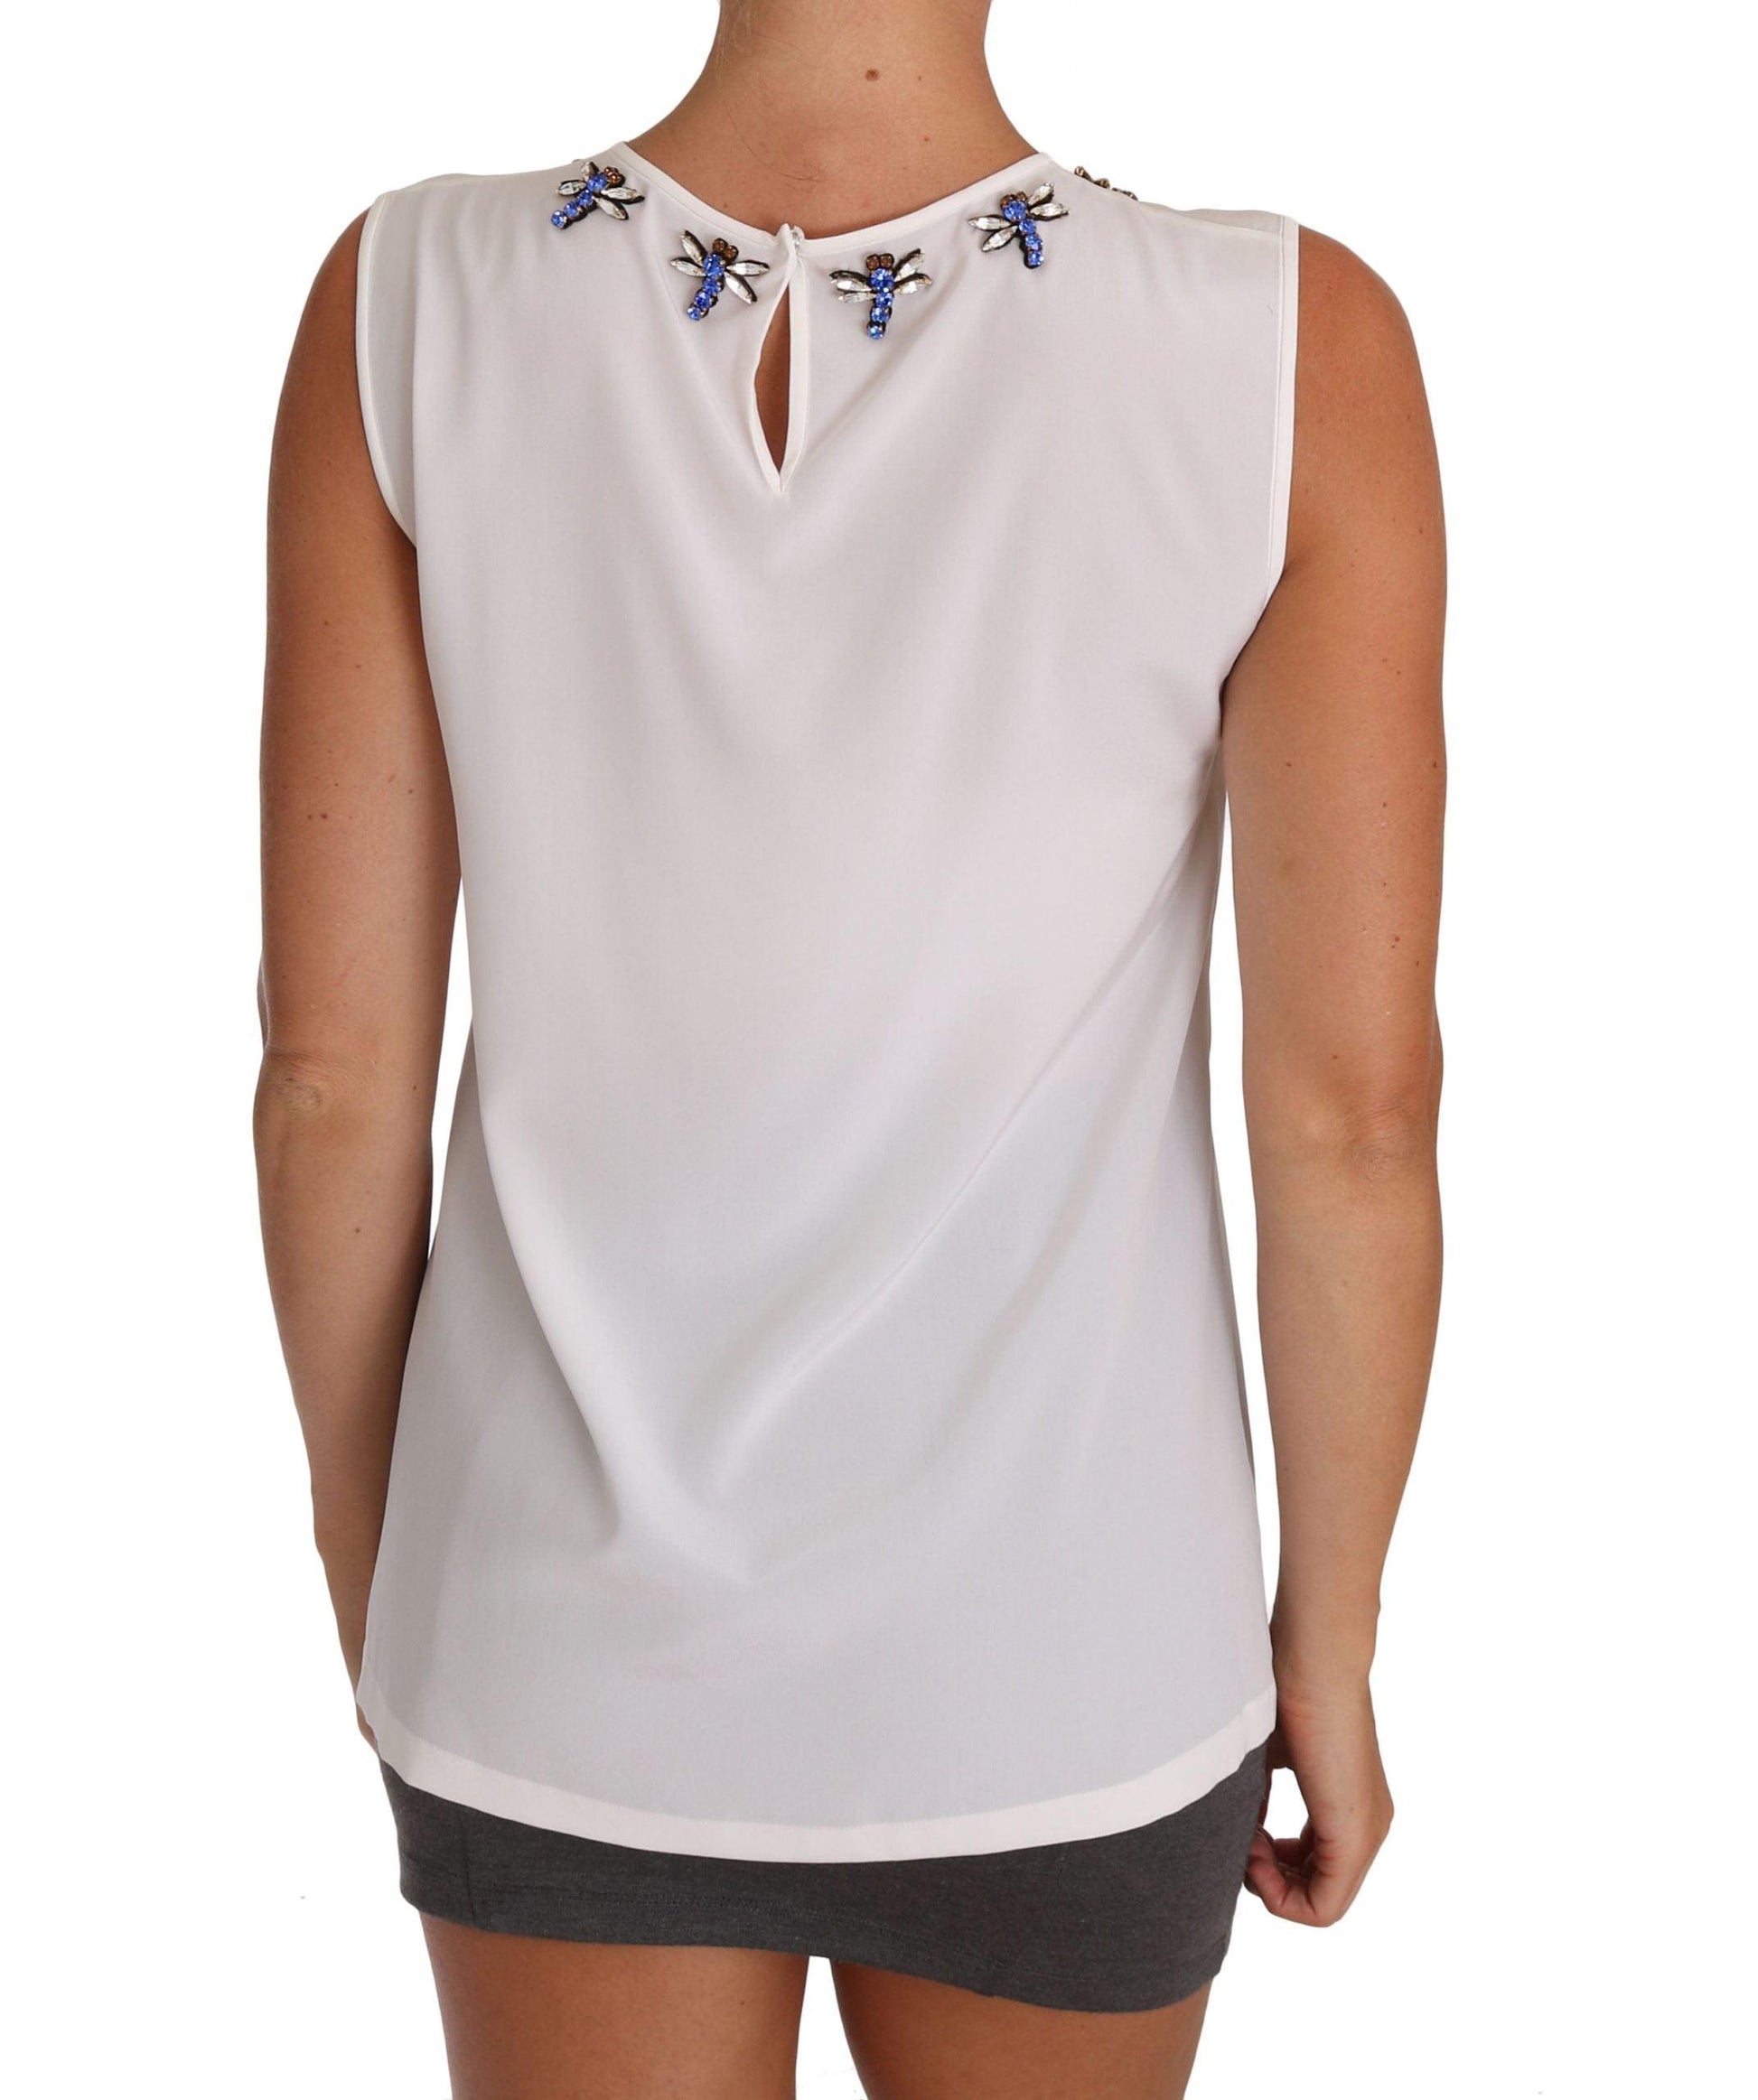 White Silk Crystal Embellished Fly T-shirt designed by Dolce & Gabbana available from Moon Behind The Hill's Women's Clothing range